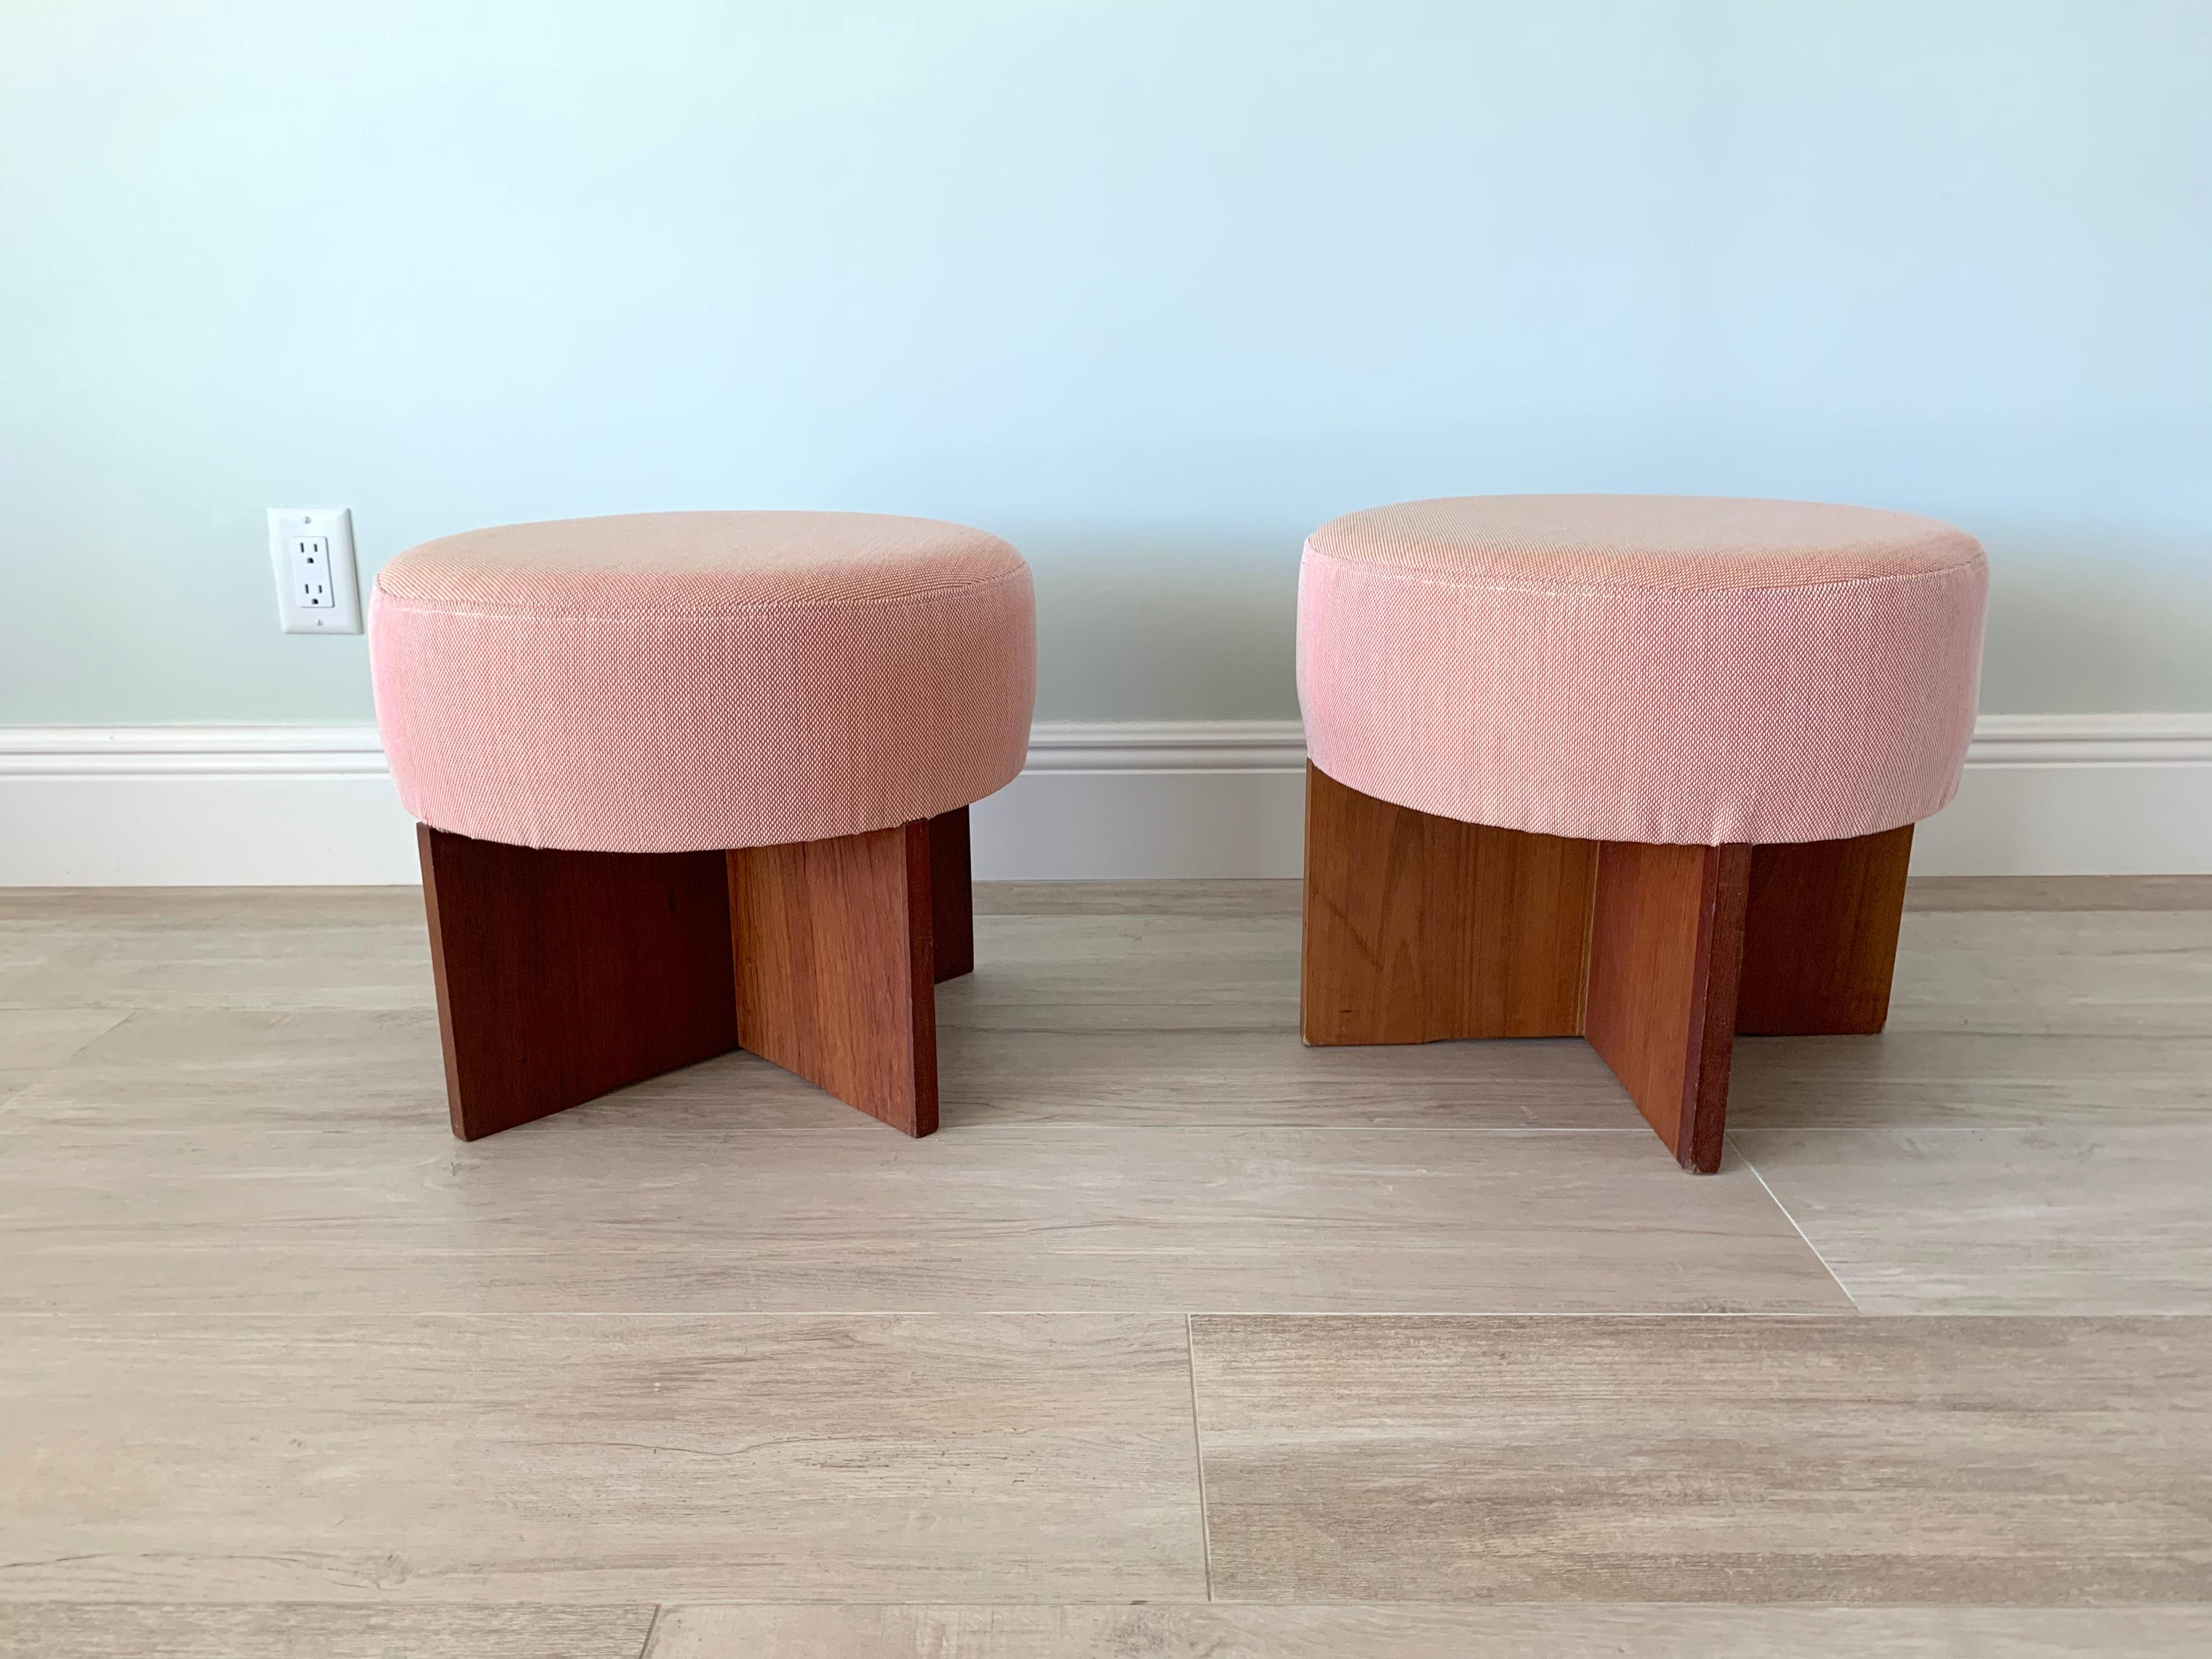 Pair of Mid-Century Modern stools in the manner of Frank Lloyd Wright.
Solid mahogany wood and Kvadrat Steelcut Trio Fabric.
Made in the USA in the 1950s.